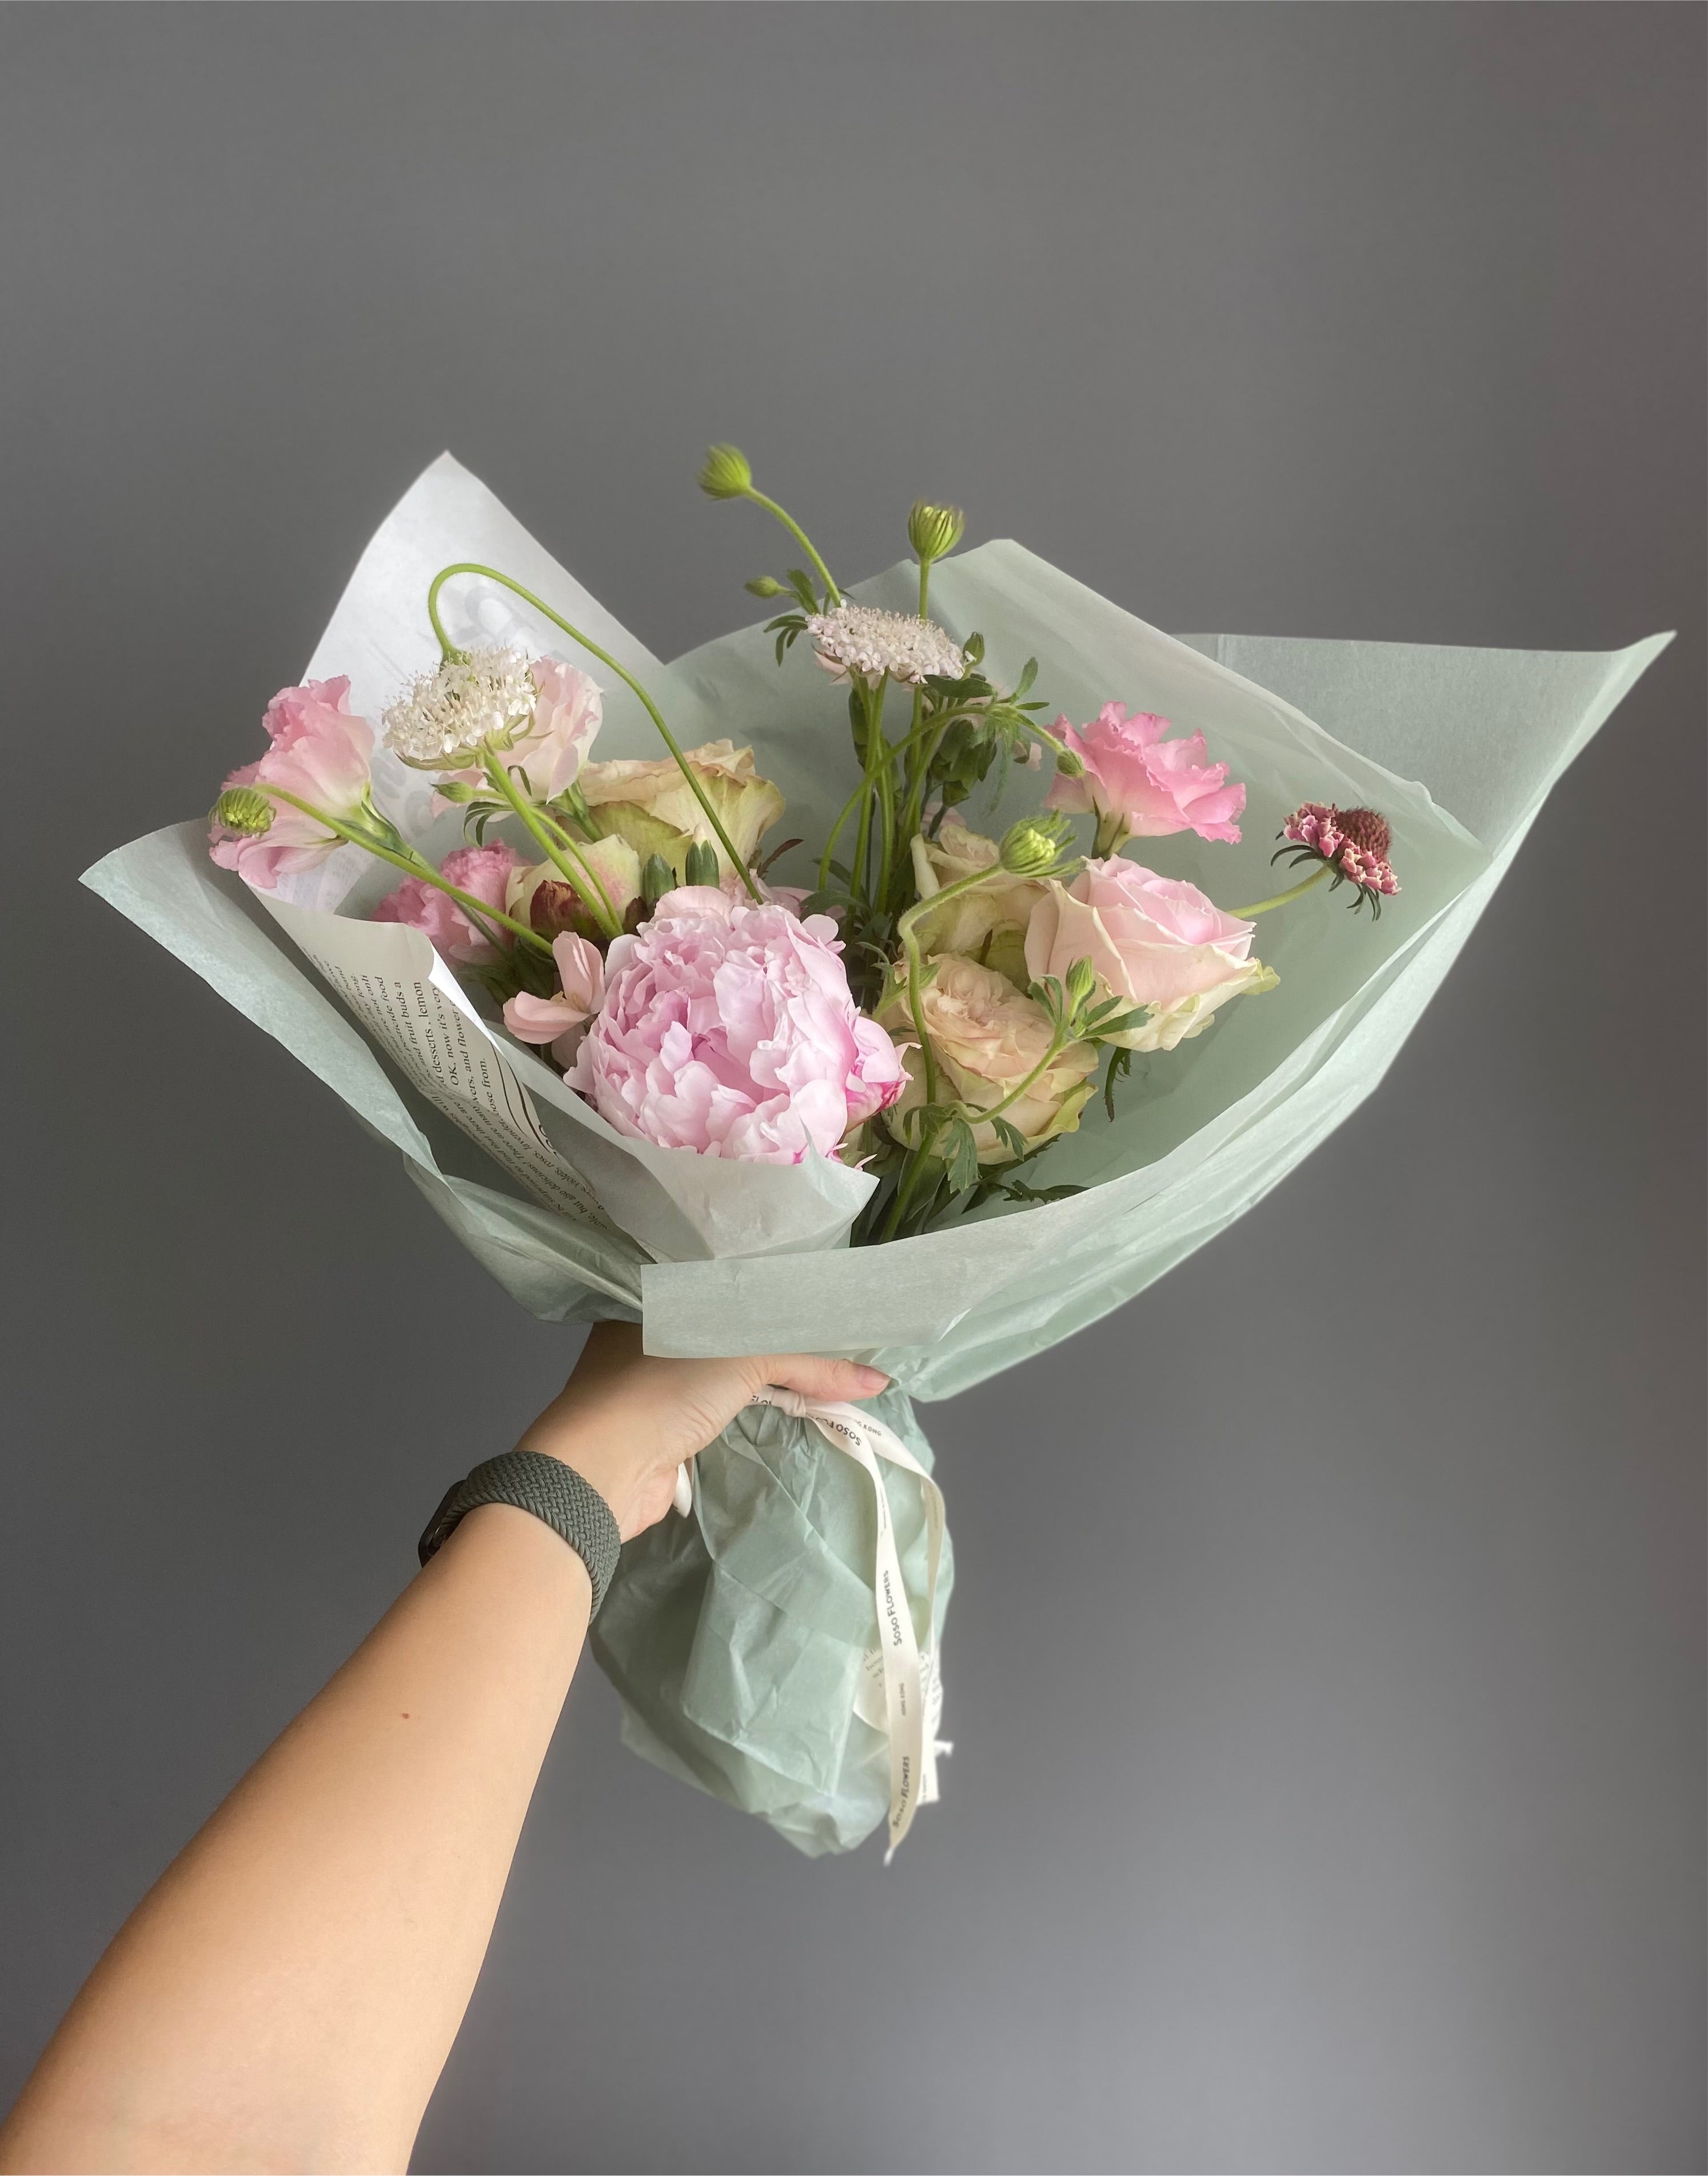 Flower delivery in Hong Kong, Affordable bouquet